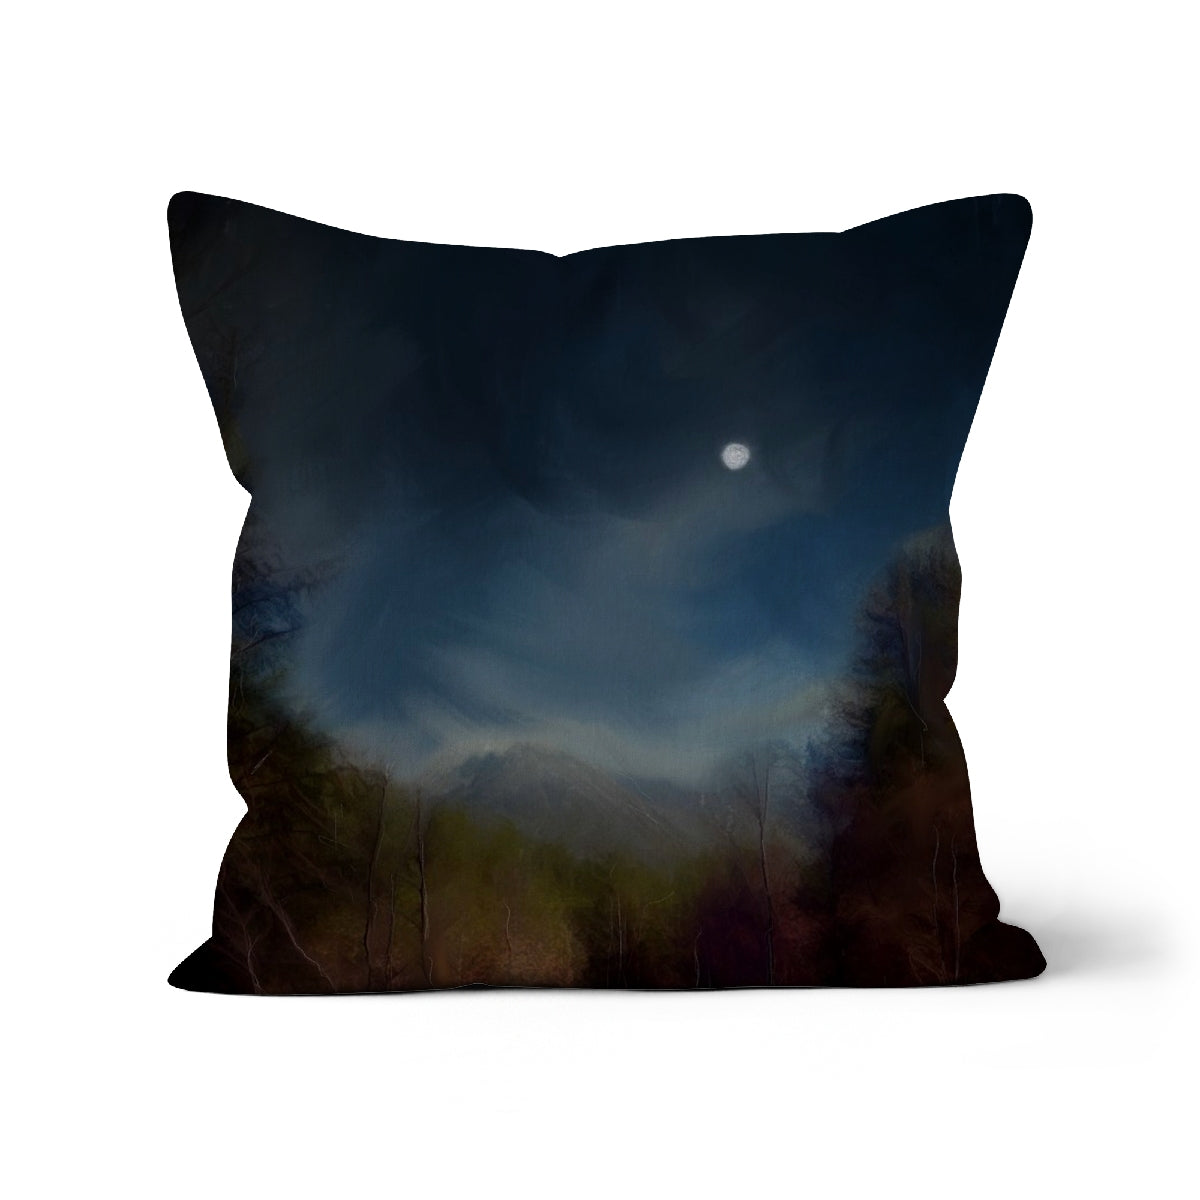 Glencoe Lochan Moonlight Art Gifts Cushion-Cushions-Scottish Lochs & Mountains Art Gallery-Faux Suede-18"x18"-Paintings, Prints, Homeware, Art Gifts From Scotland By Scottish Artist Kevin Hunter